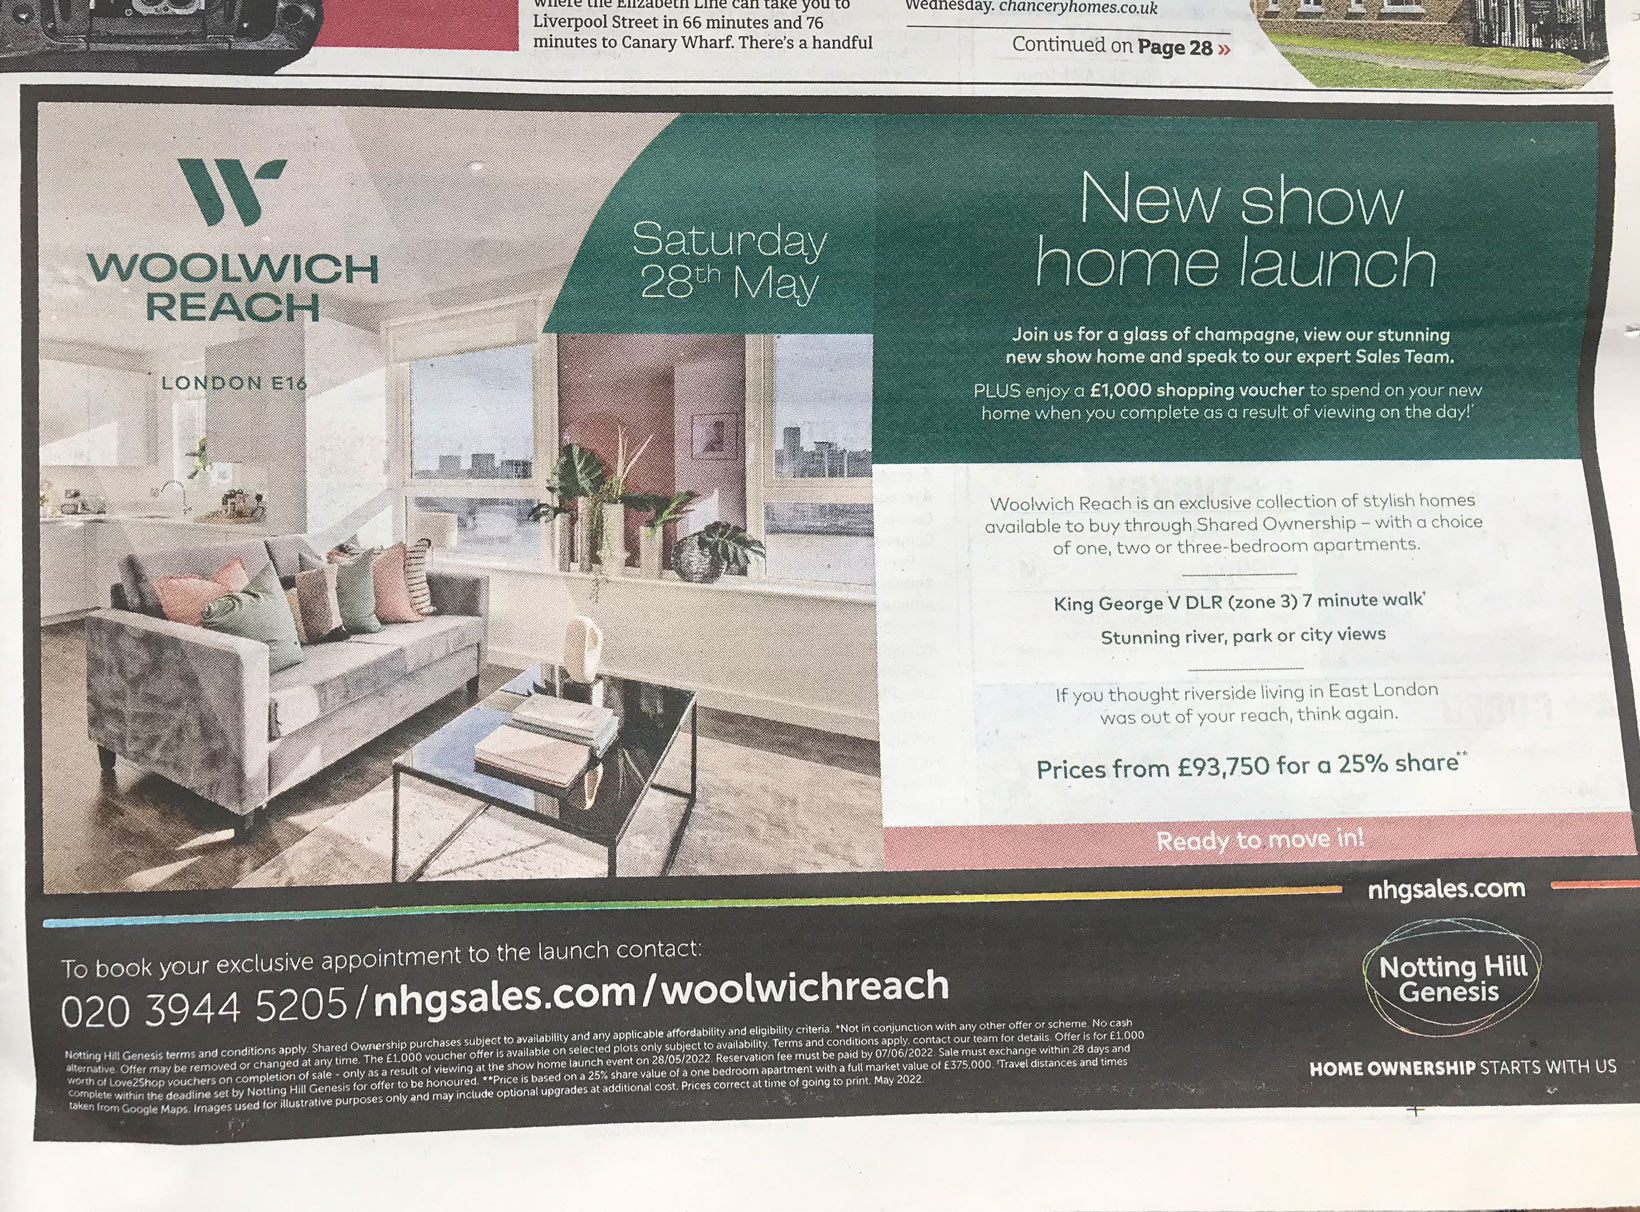 New show home launch